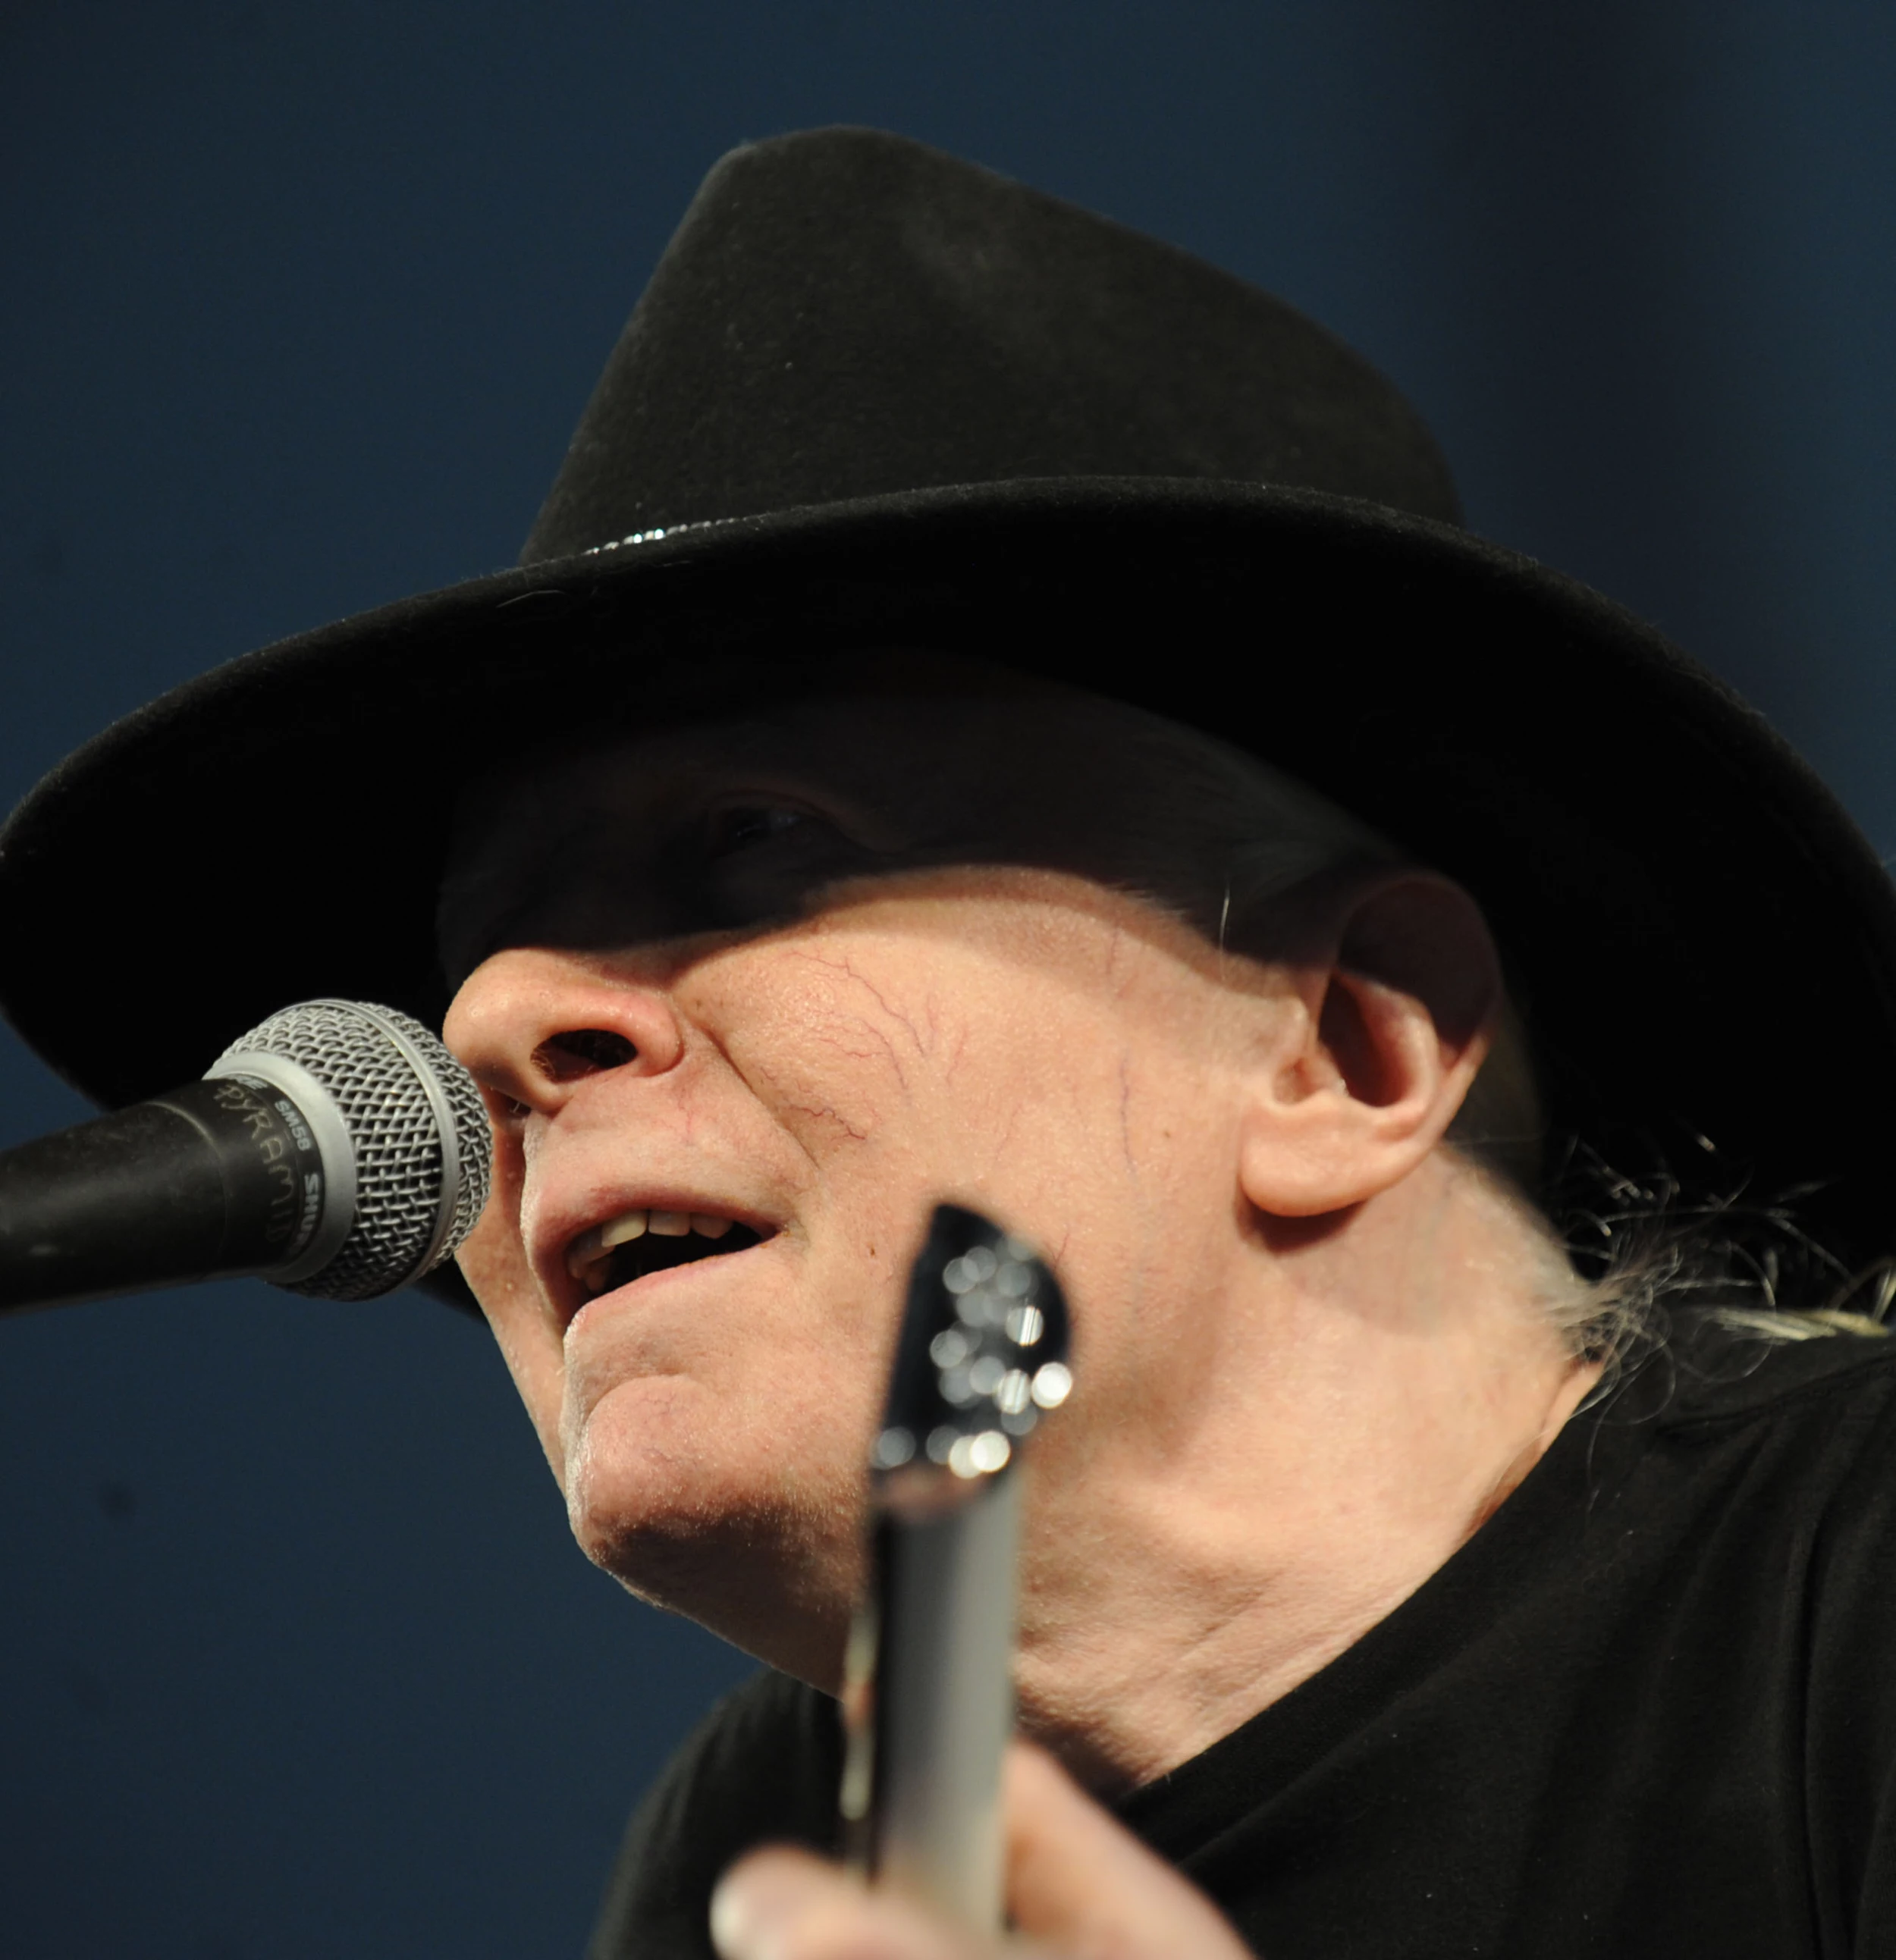 johnny winter cause of death